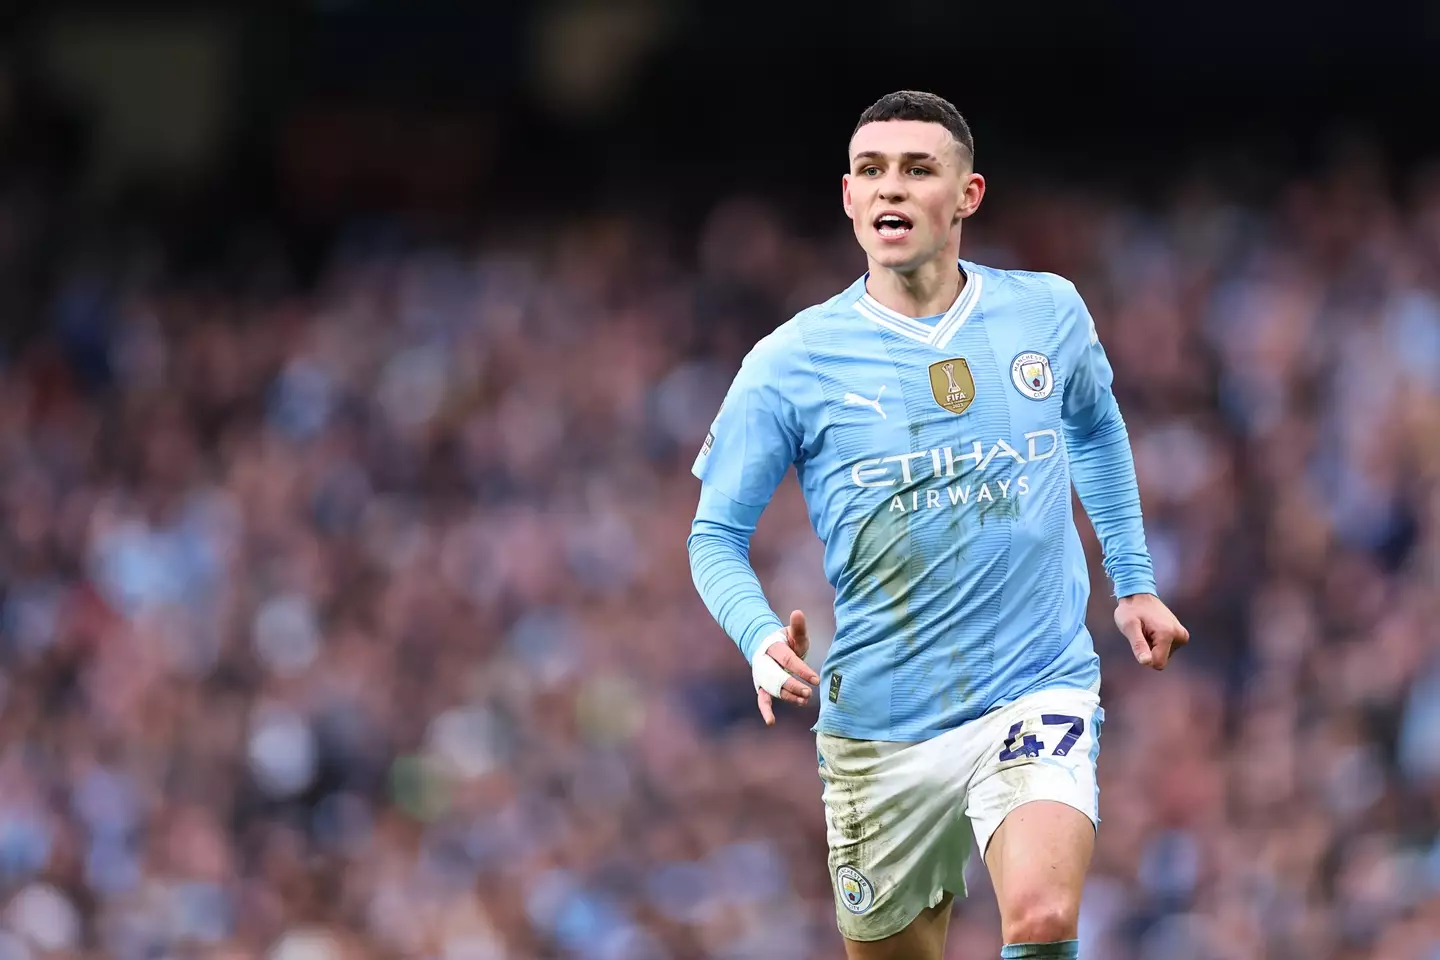 Foden has been exceptional for Man City this season (Getty)